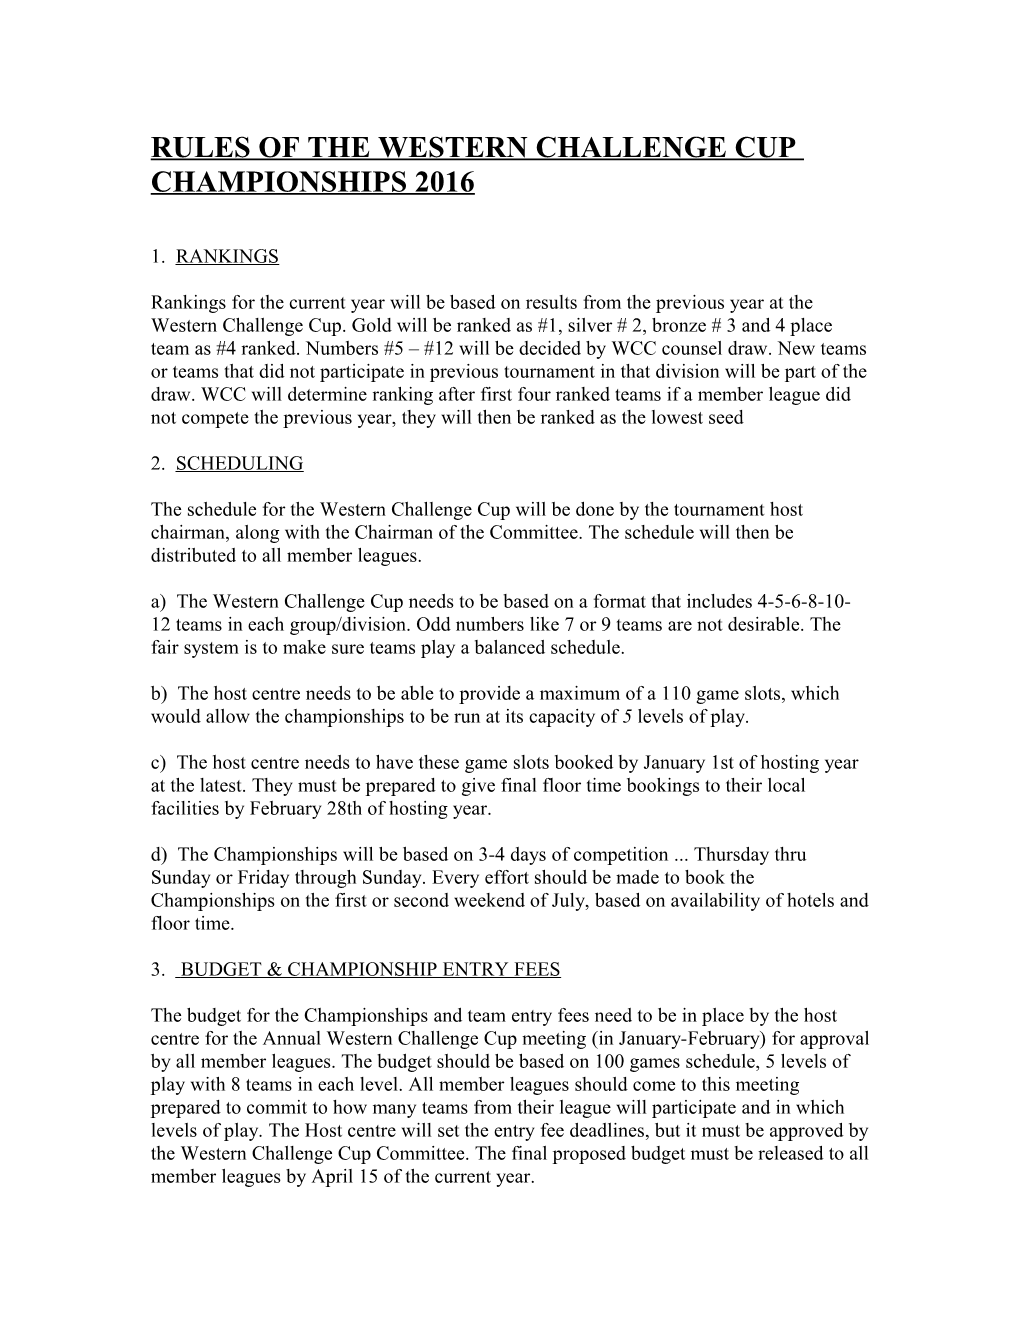 Rules of the Western Challenge Cup Championships